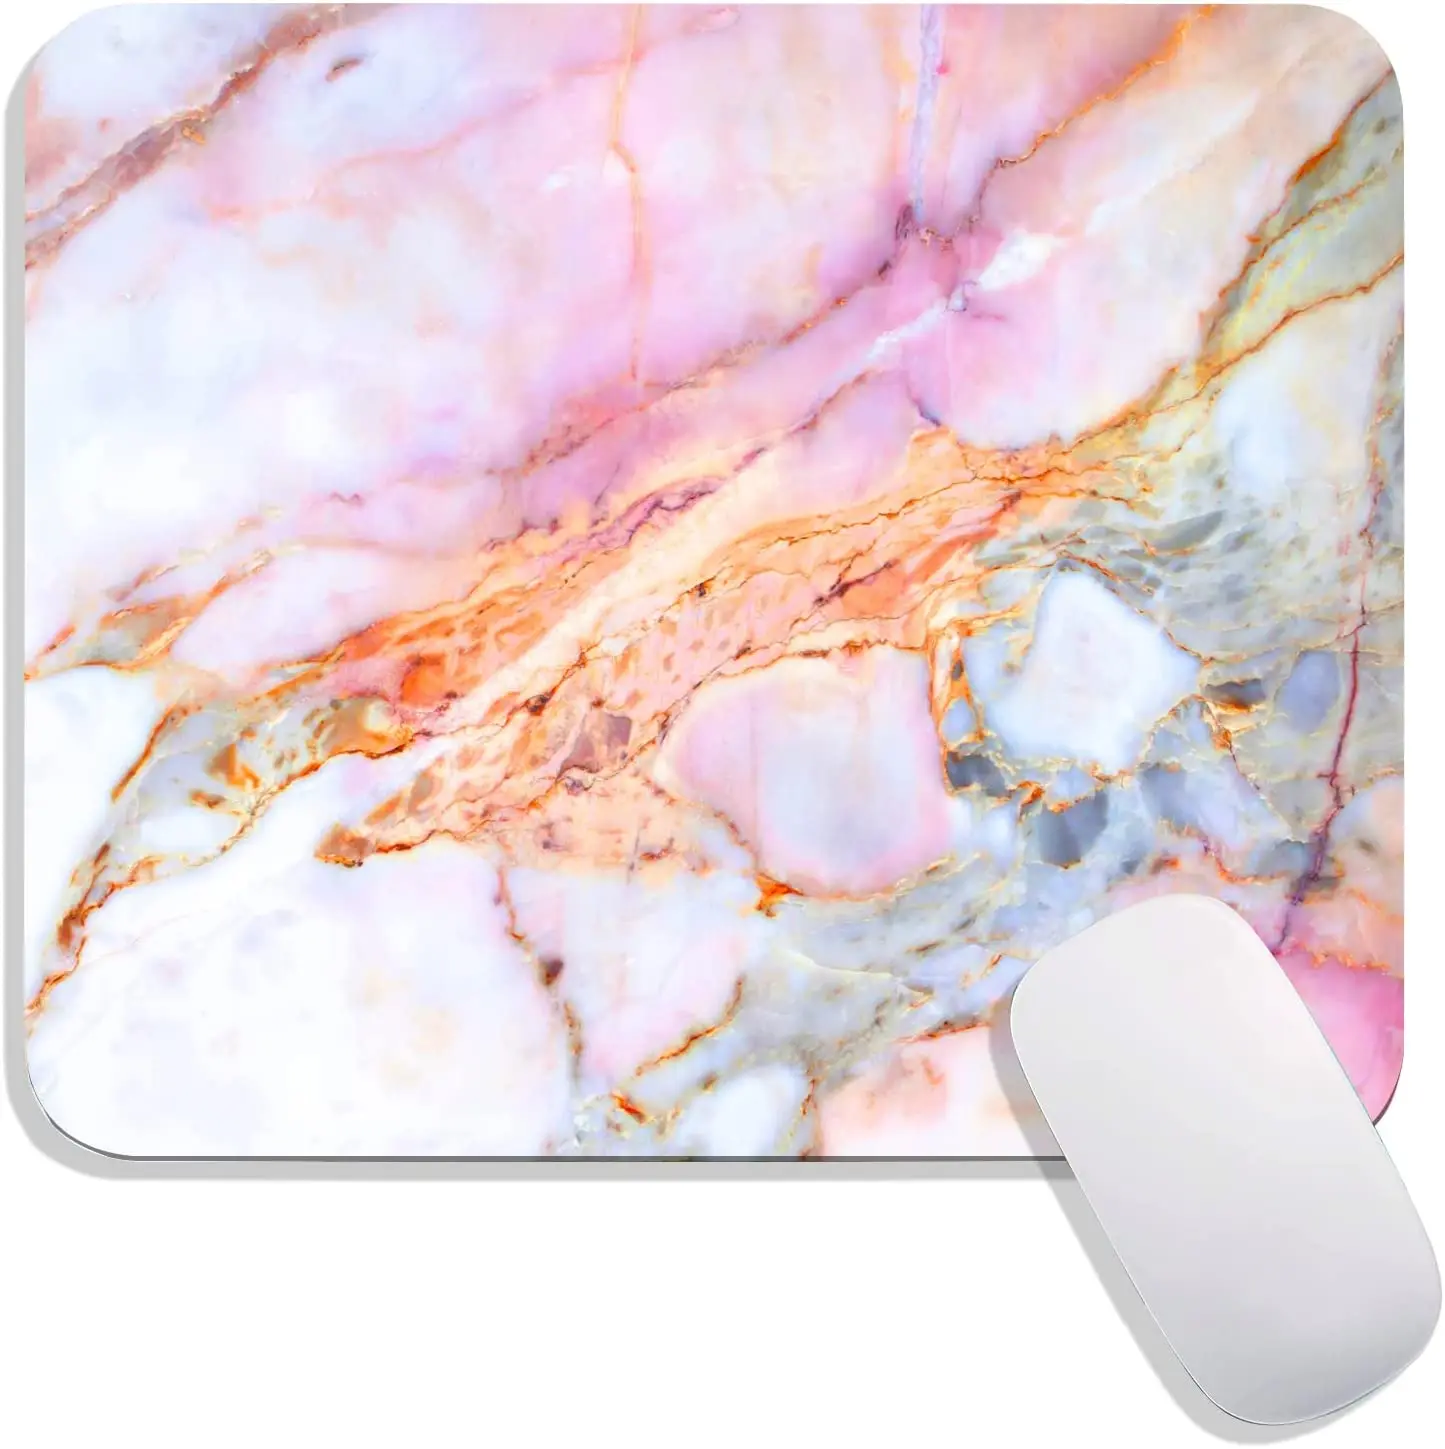 

Pink Marble Mouse Pad Personalized Premium-Textured Mousepads Design Non-Slip Rubber Base Computer Mouse Pads 9.7x7.9 Inches